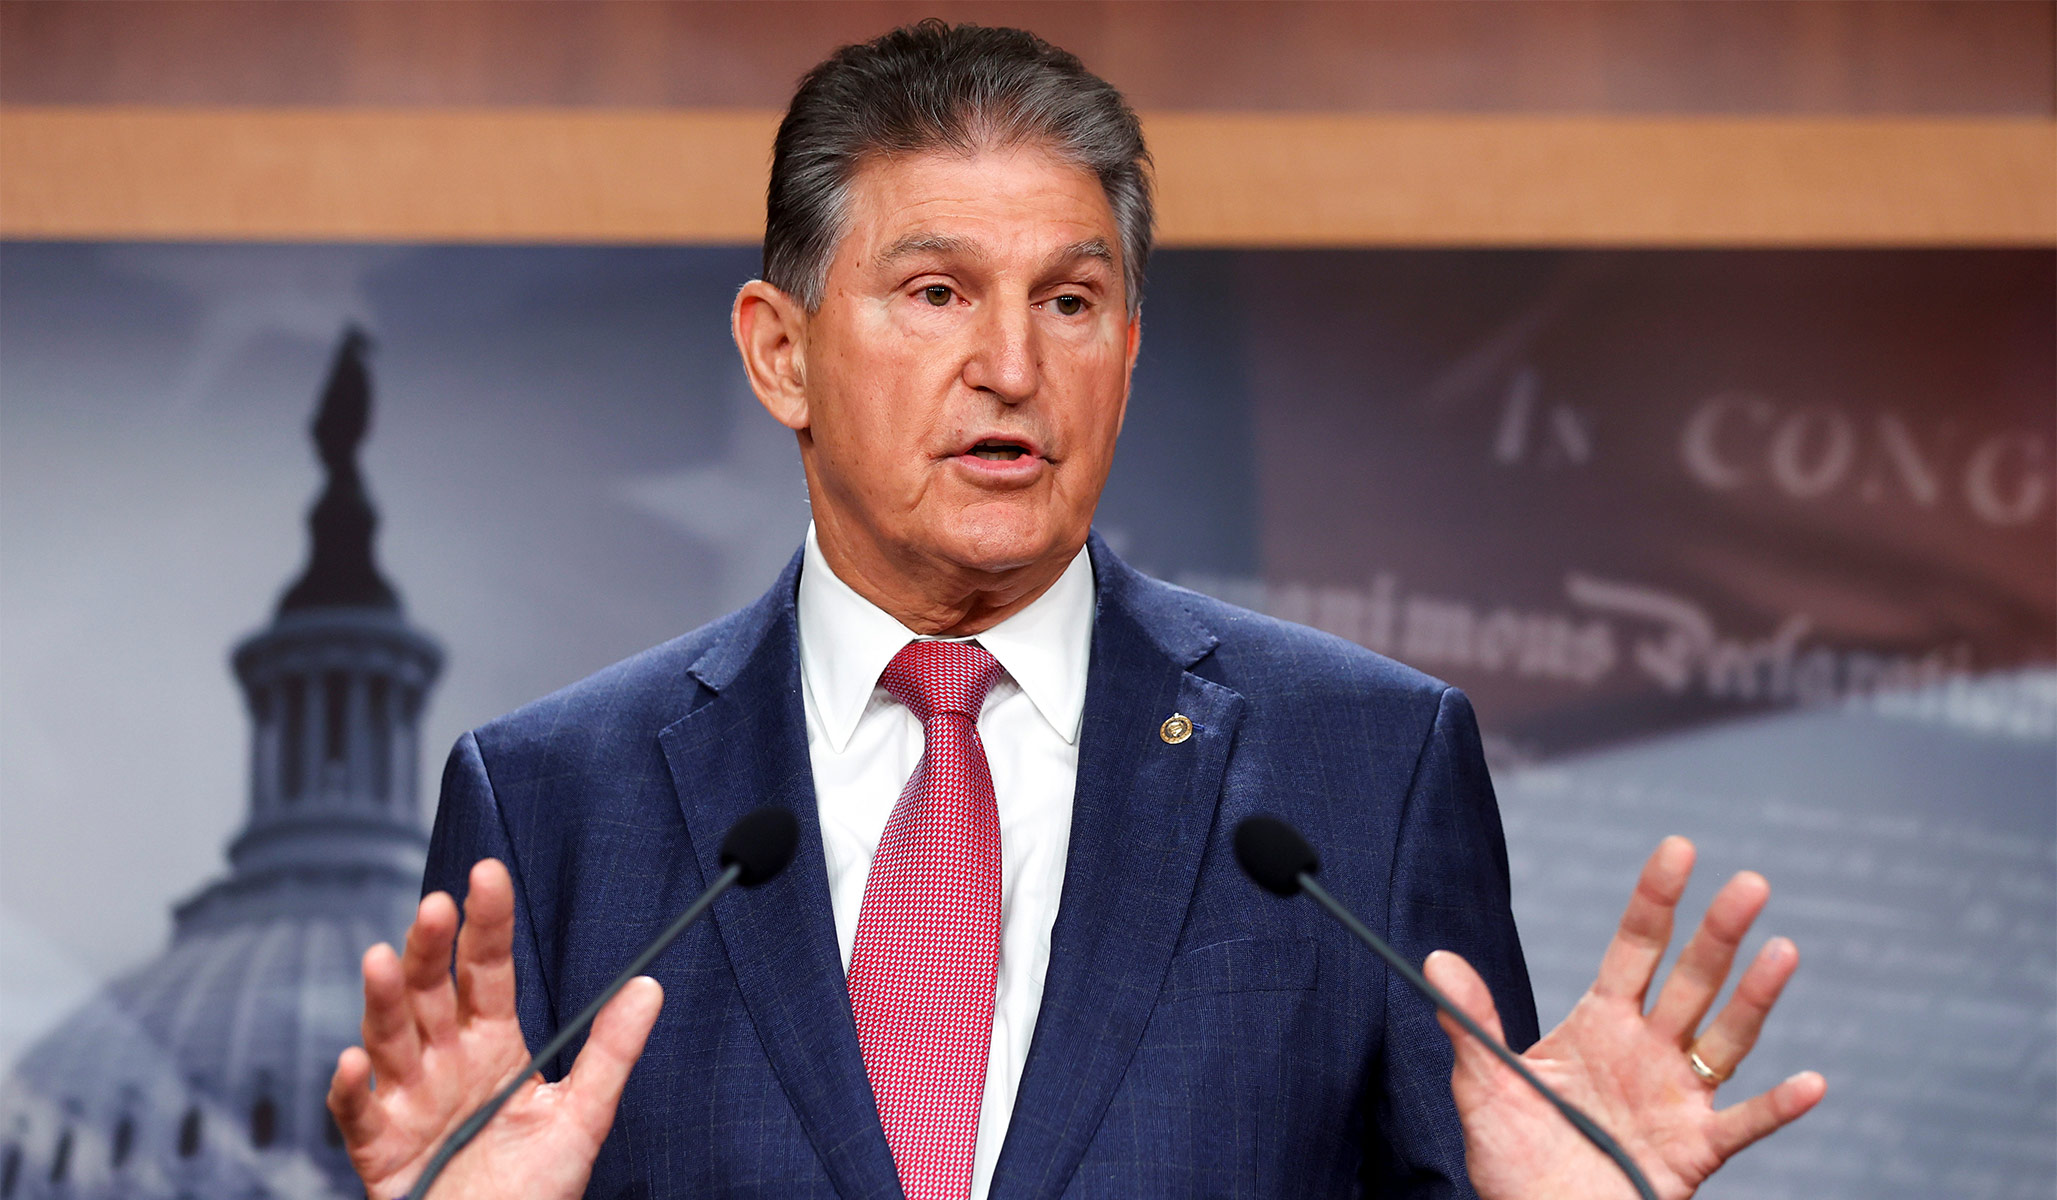 Manchin Not Ready to Vote 'Yes,' Blasts 'Shell Games' and 'Gimmicks'